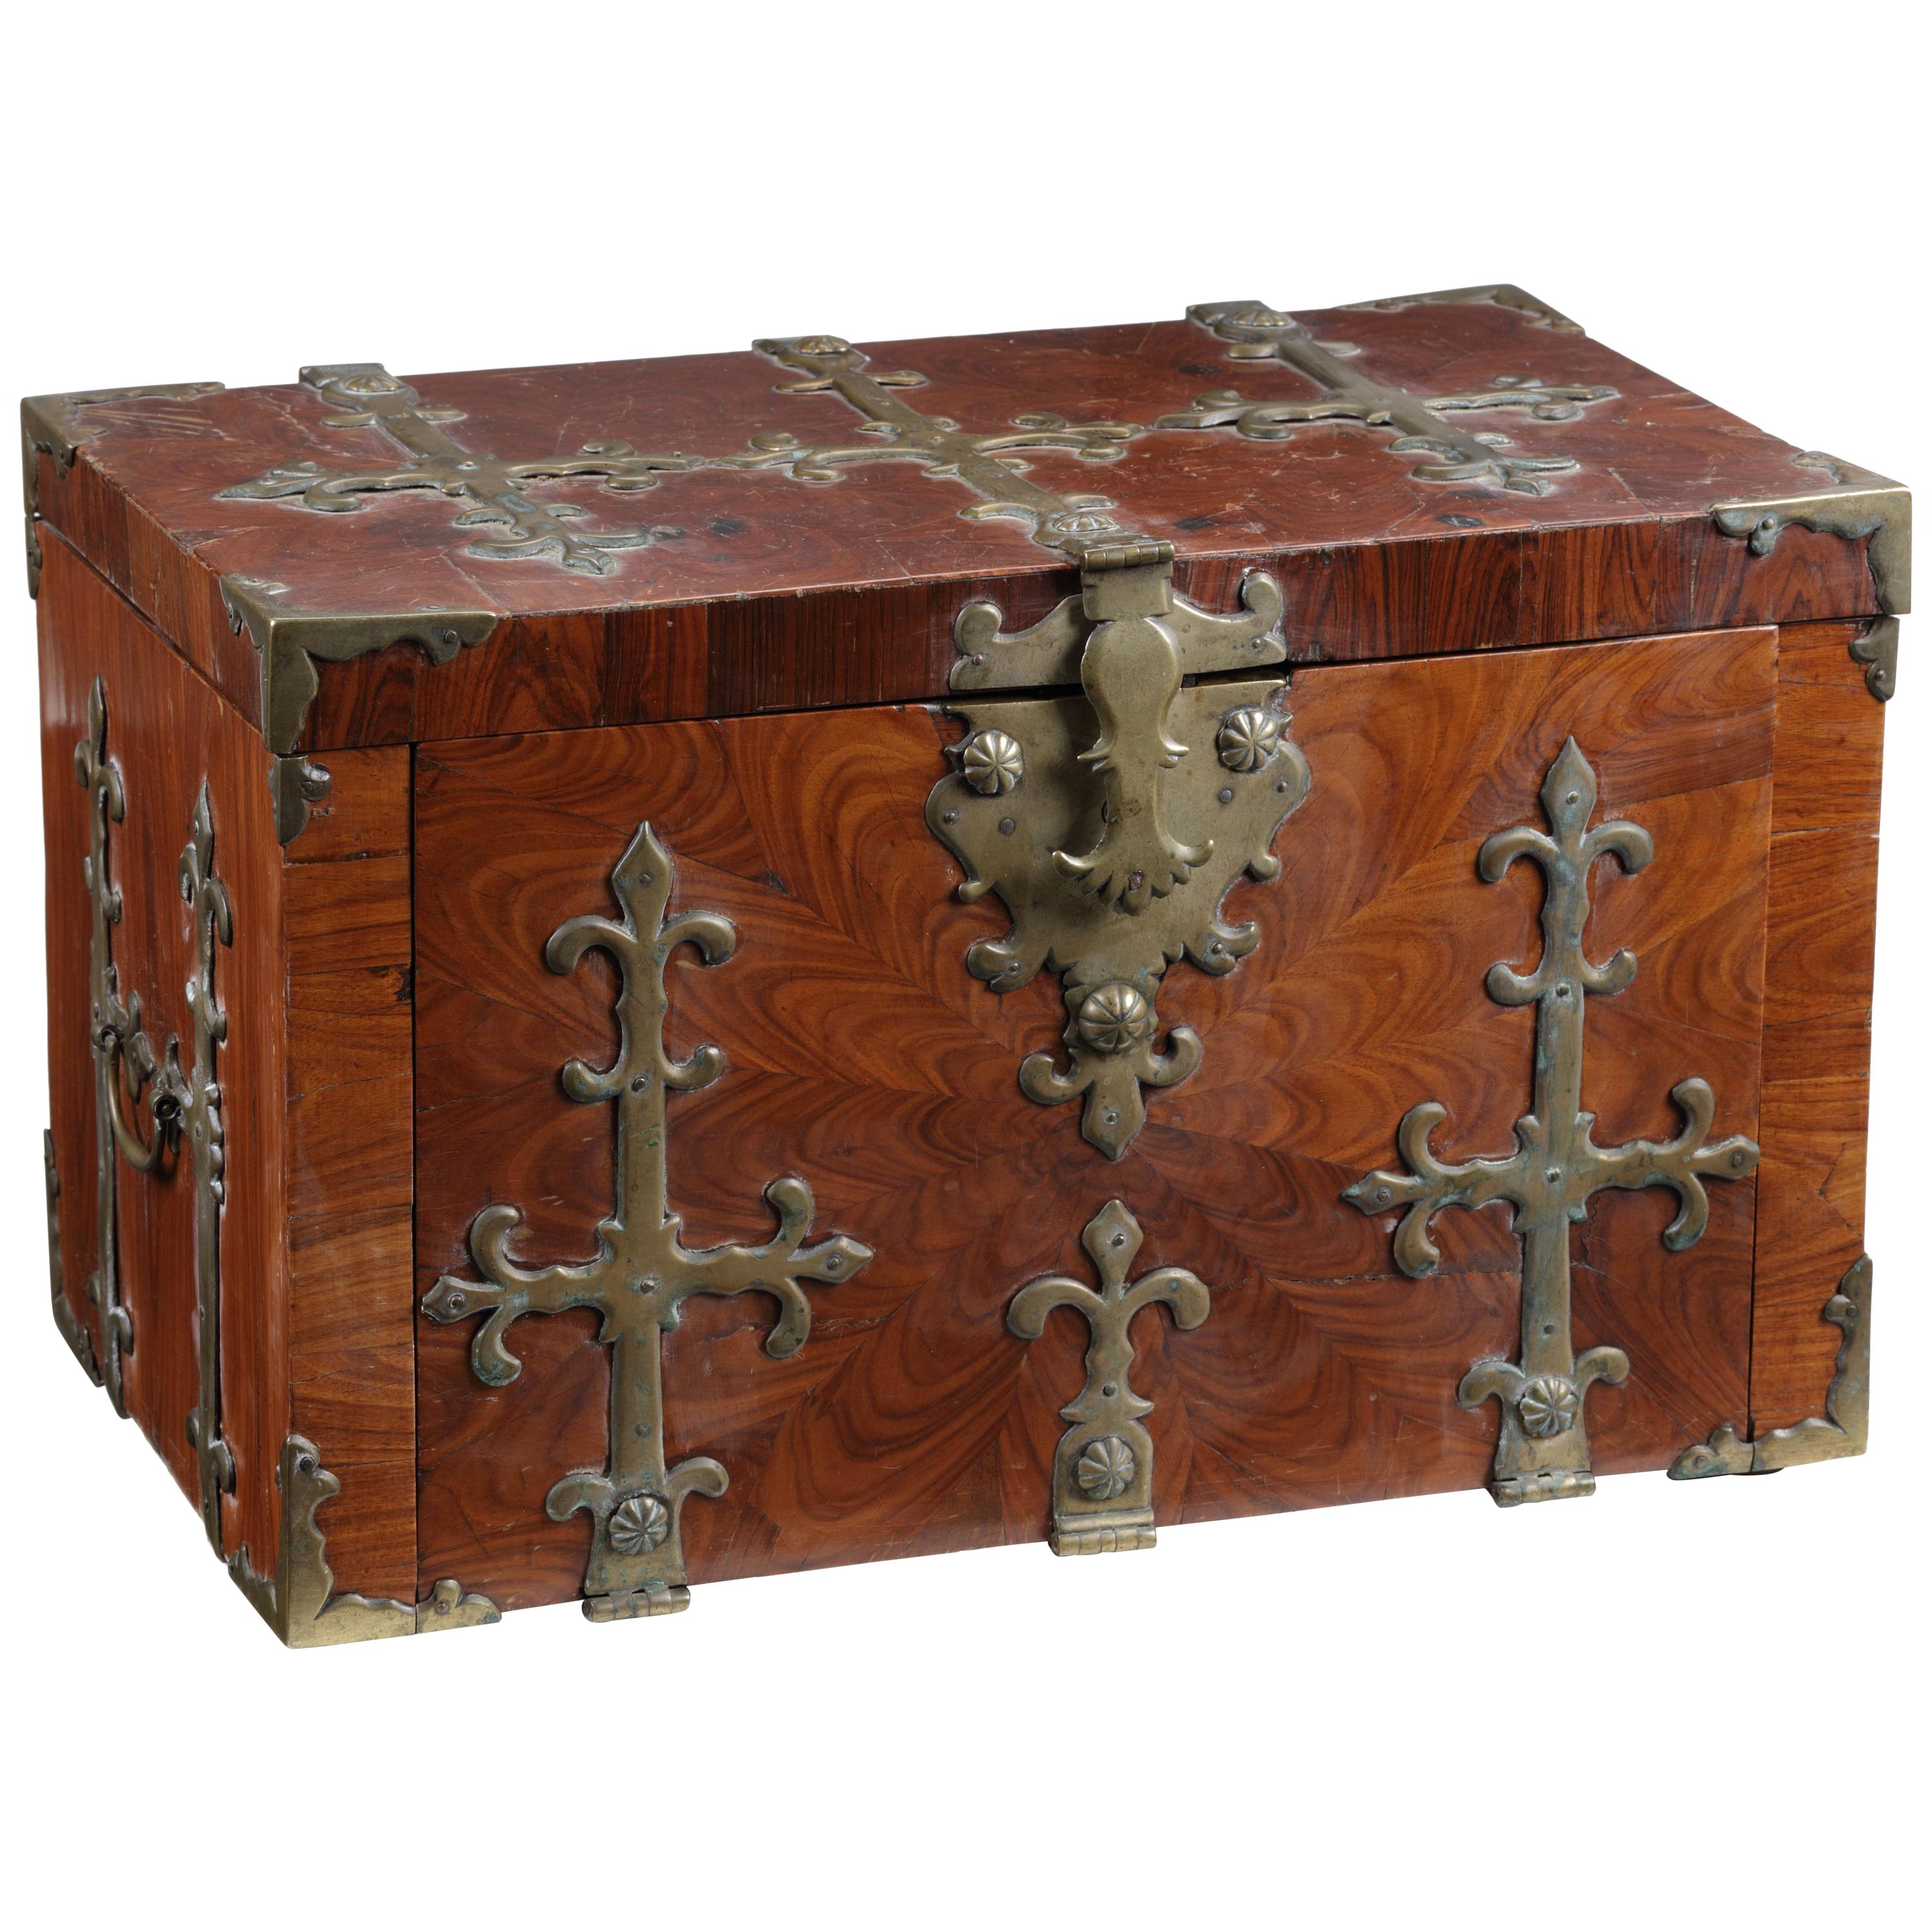 Walnut Veneer on Oak Strong Box 'Coffre Fort' or 'Captain's Chest, 17th Century